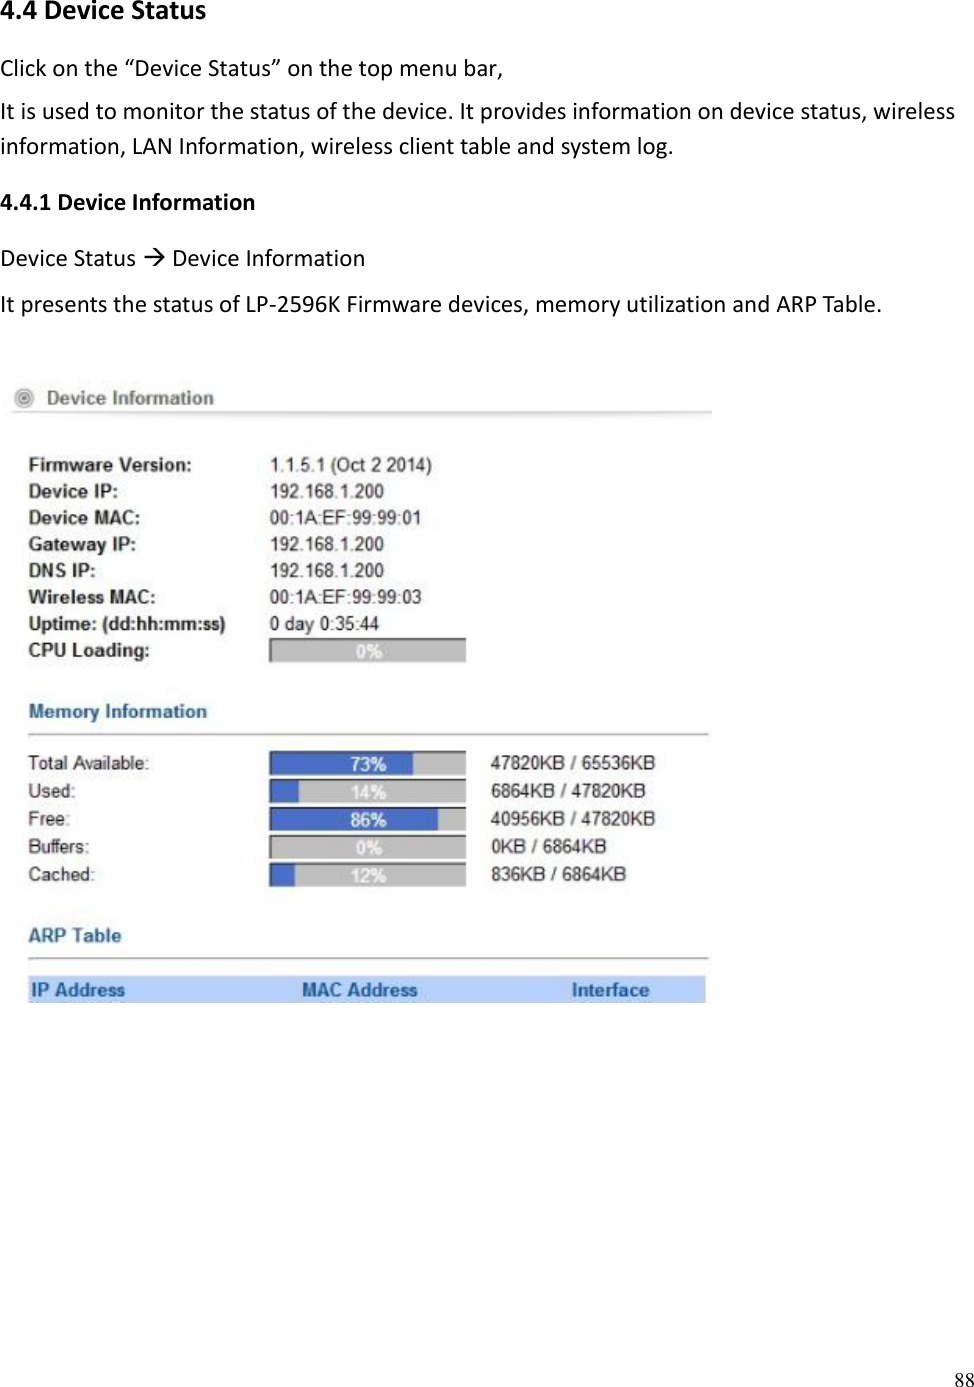 88  4.4 Device Status Click on the “Device Status” on the top menu bar,  It is used to monitor the status of the device. It provides information on device status, wireless information, LAN Information, wireless client table and system log.  4.4.1 Device Information Device Status  Device Information It presents the status of LP-2596K Firmware devices, memory utilization and ARP Table.      